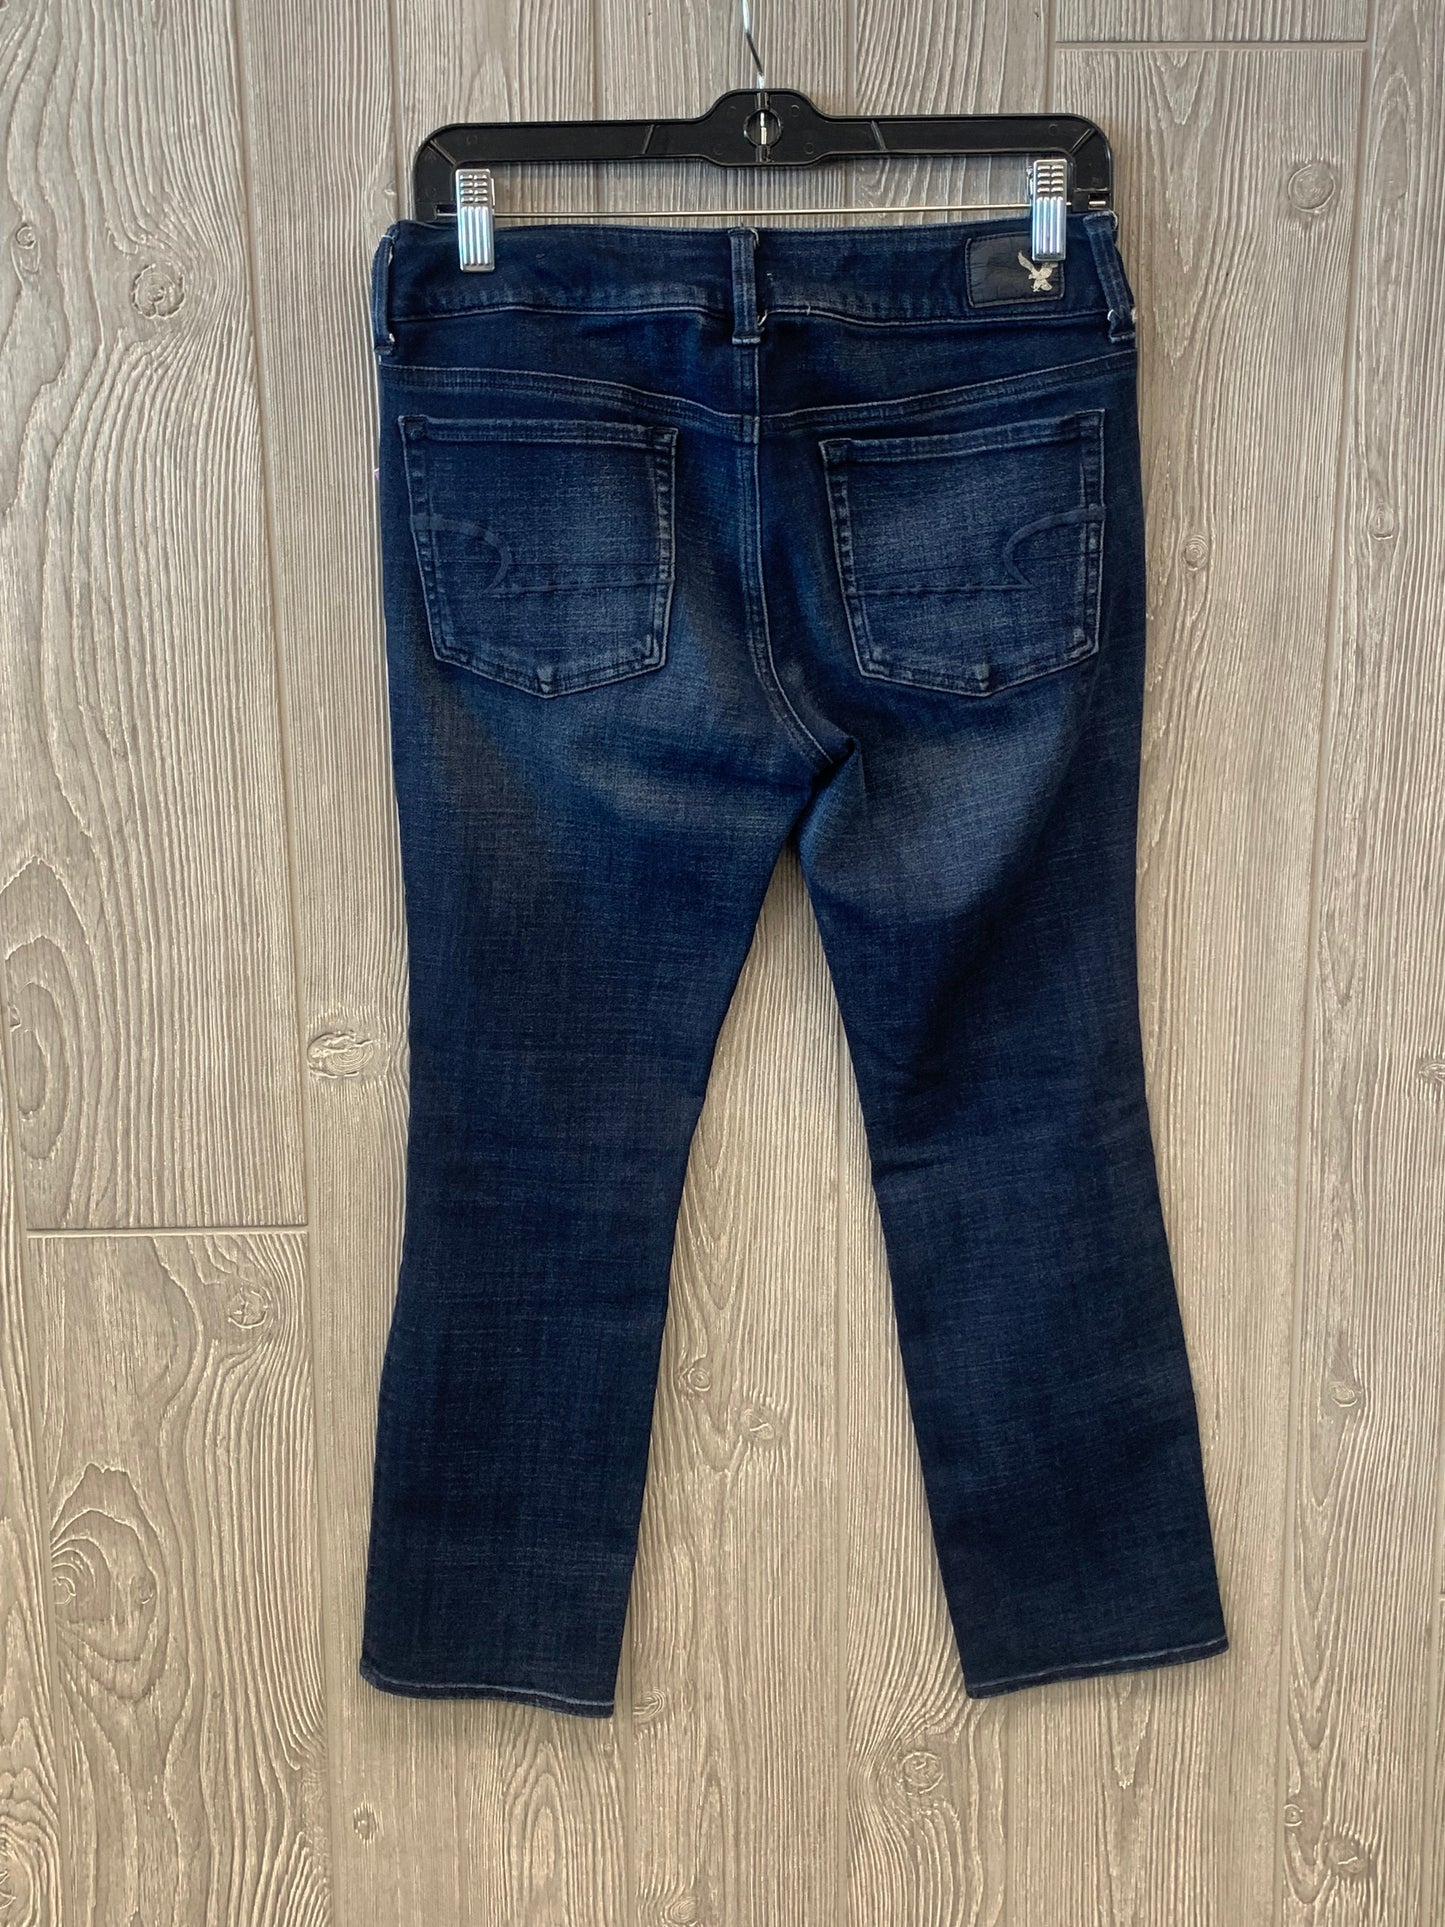 Jeans Cropped By American Eagle  Size: 8